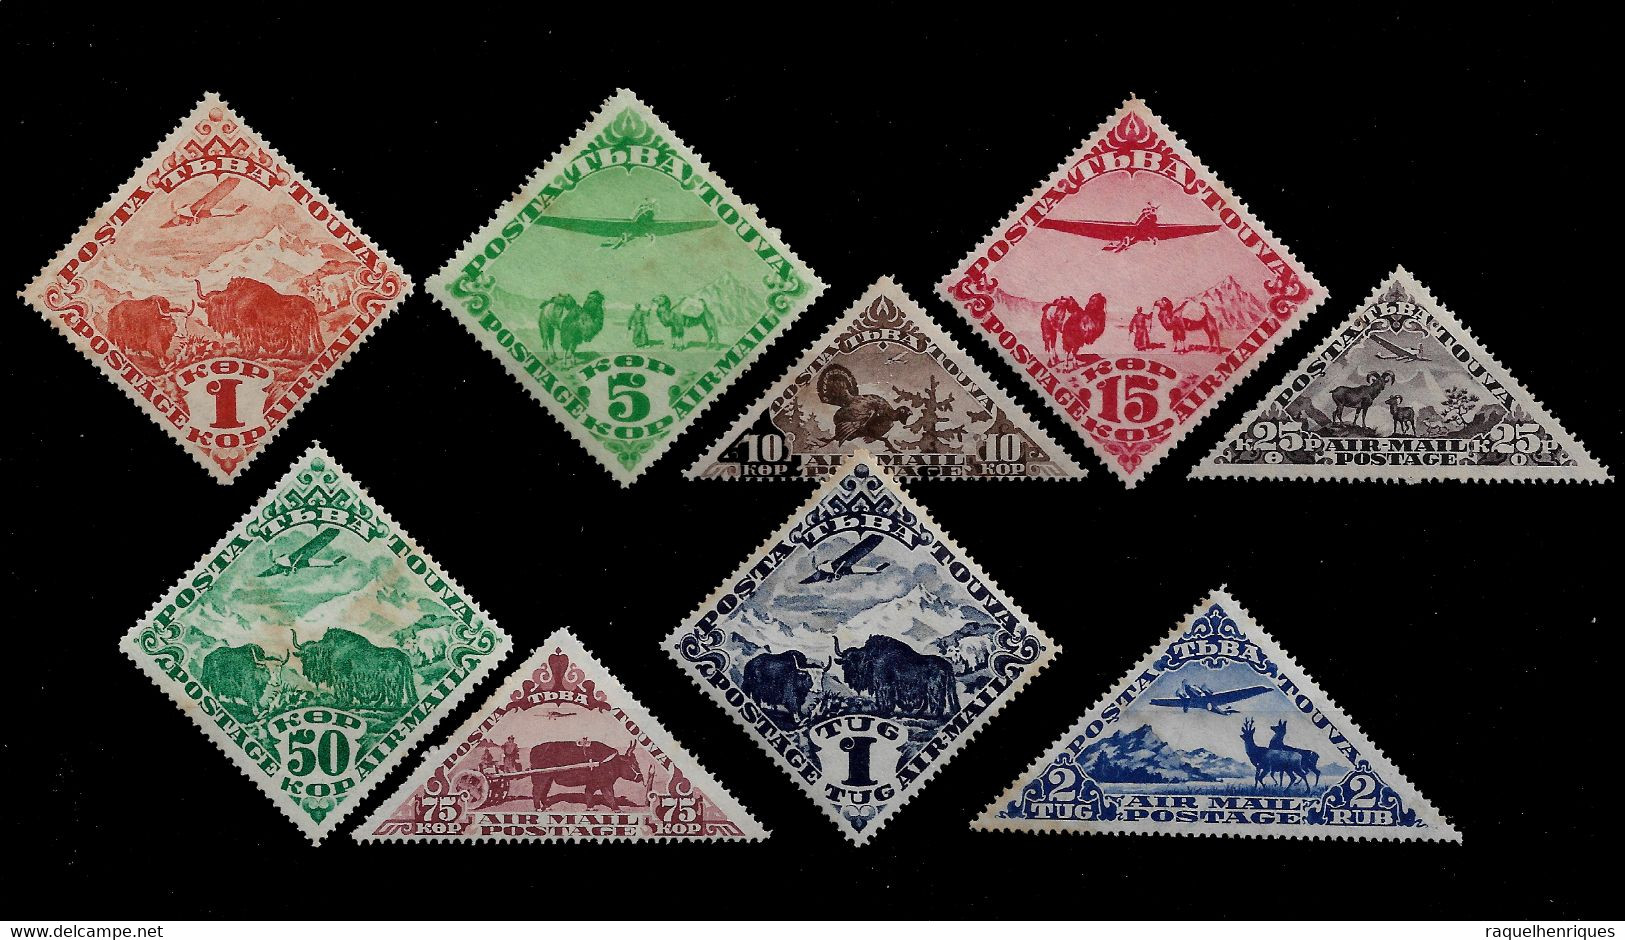 RUSSIA TANNU TOUVA STAMP - 1934 Airmail - Airplanes And Animals SET MH (BA5#301) - Toeva